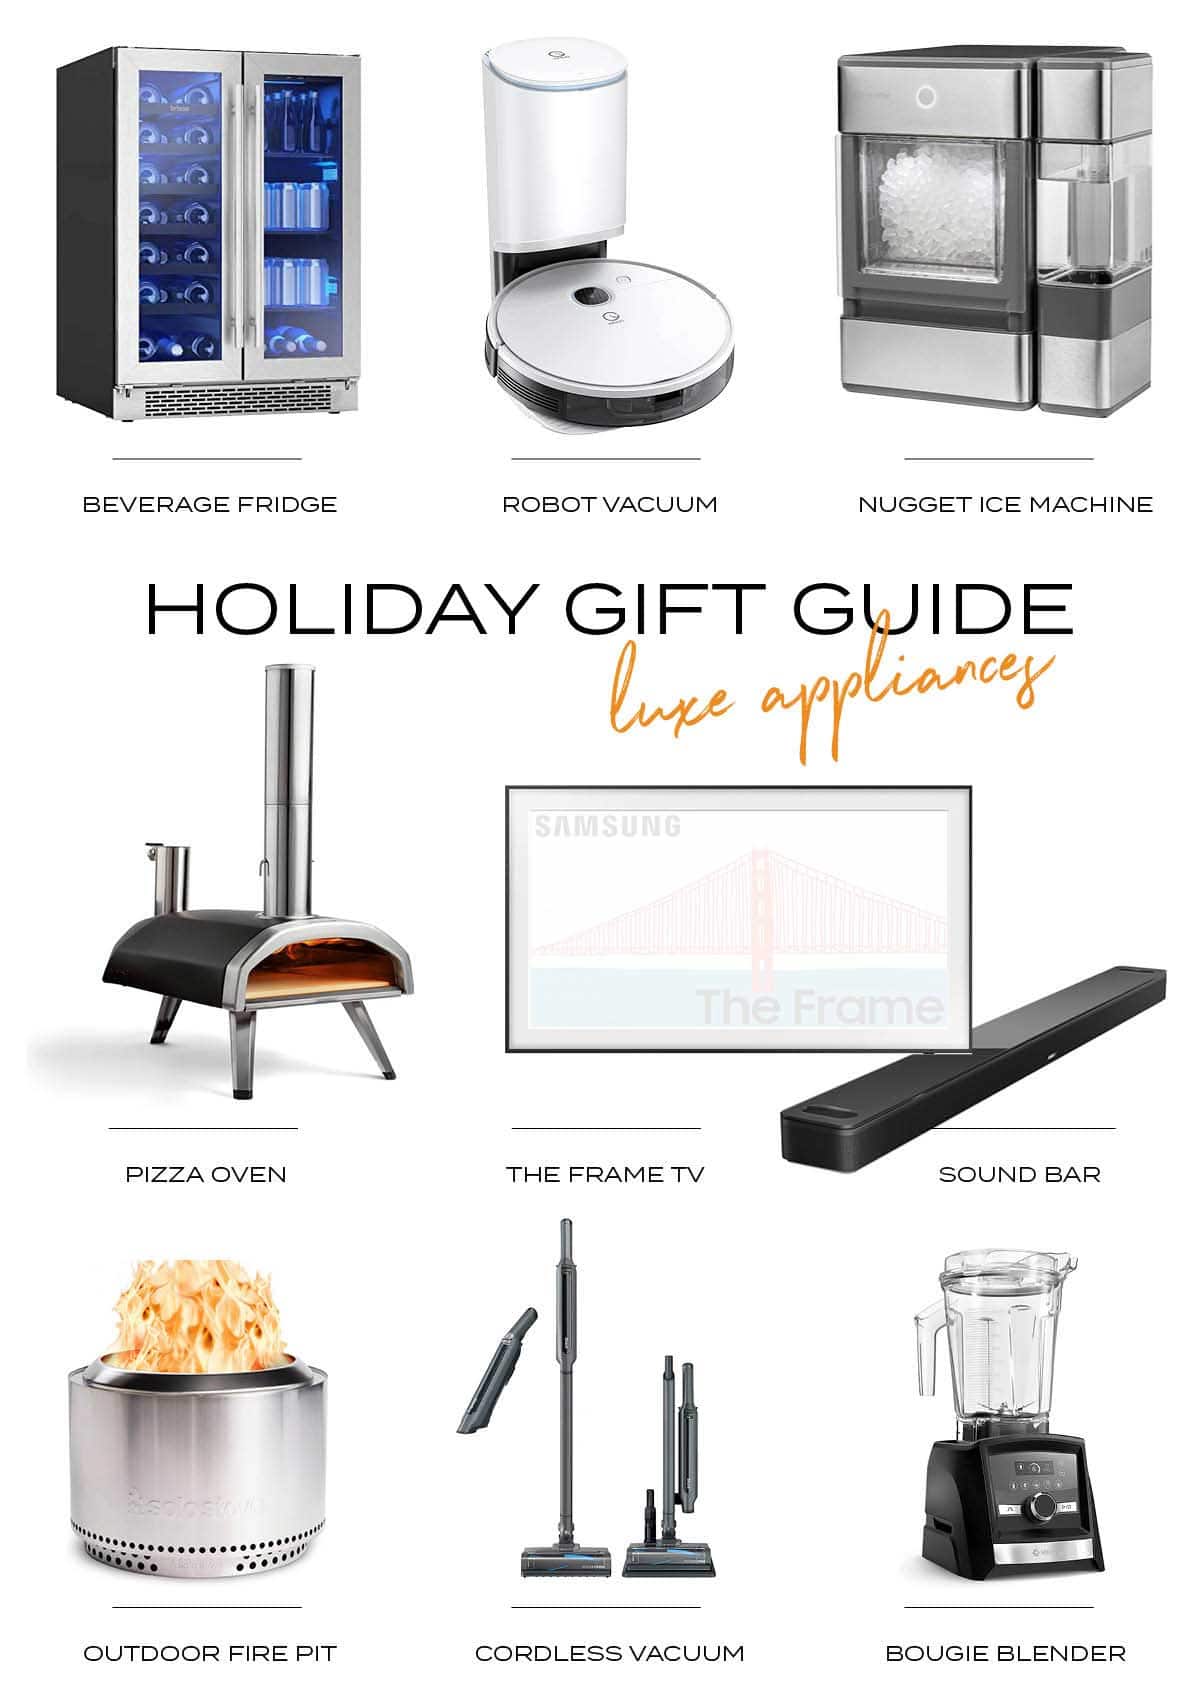 Best Holiday Gift Guide for the home 2021